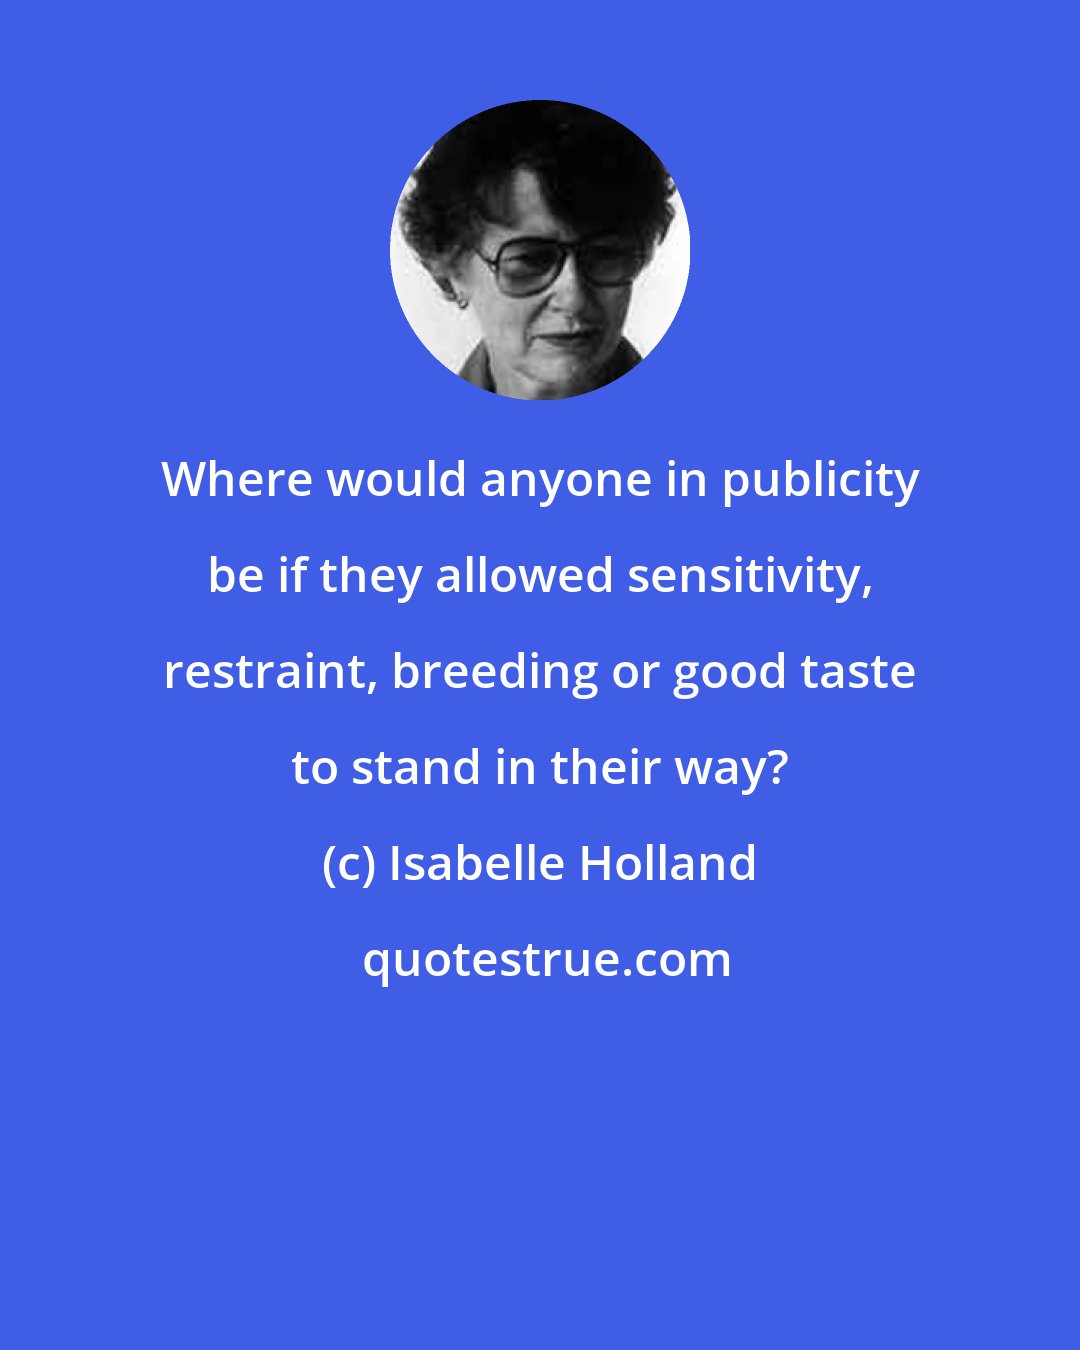 Isabelle Holland: Where would anyone in publicity be if they allowed sensitivity, restraint, breeding or good taste to stand in their way?